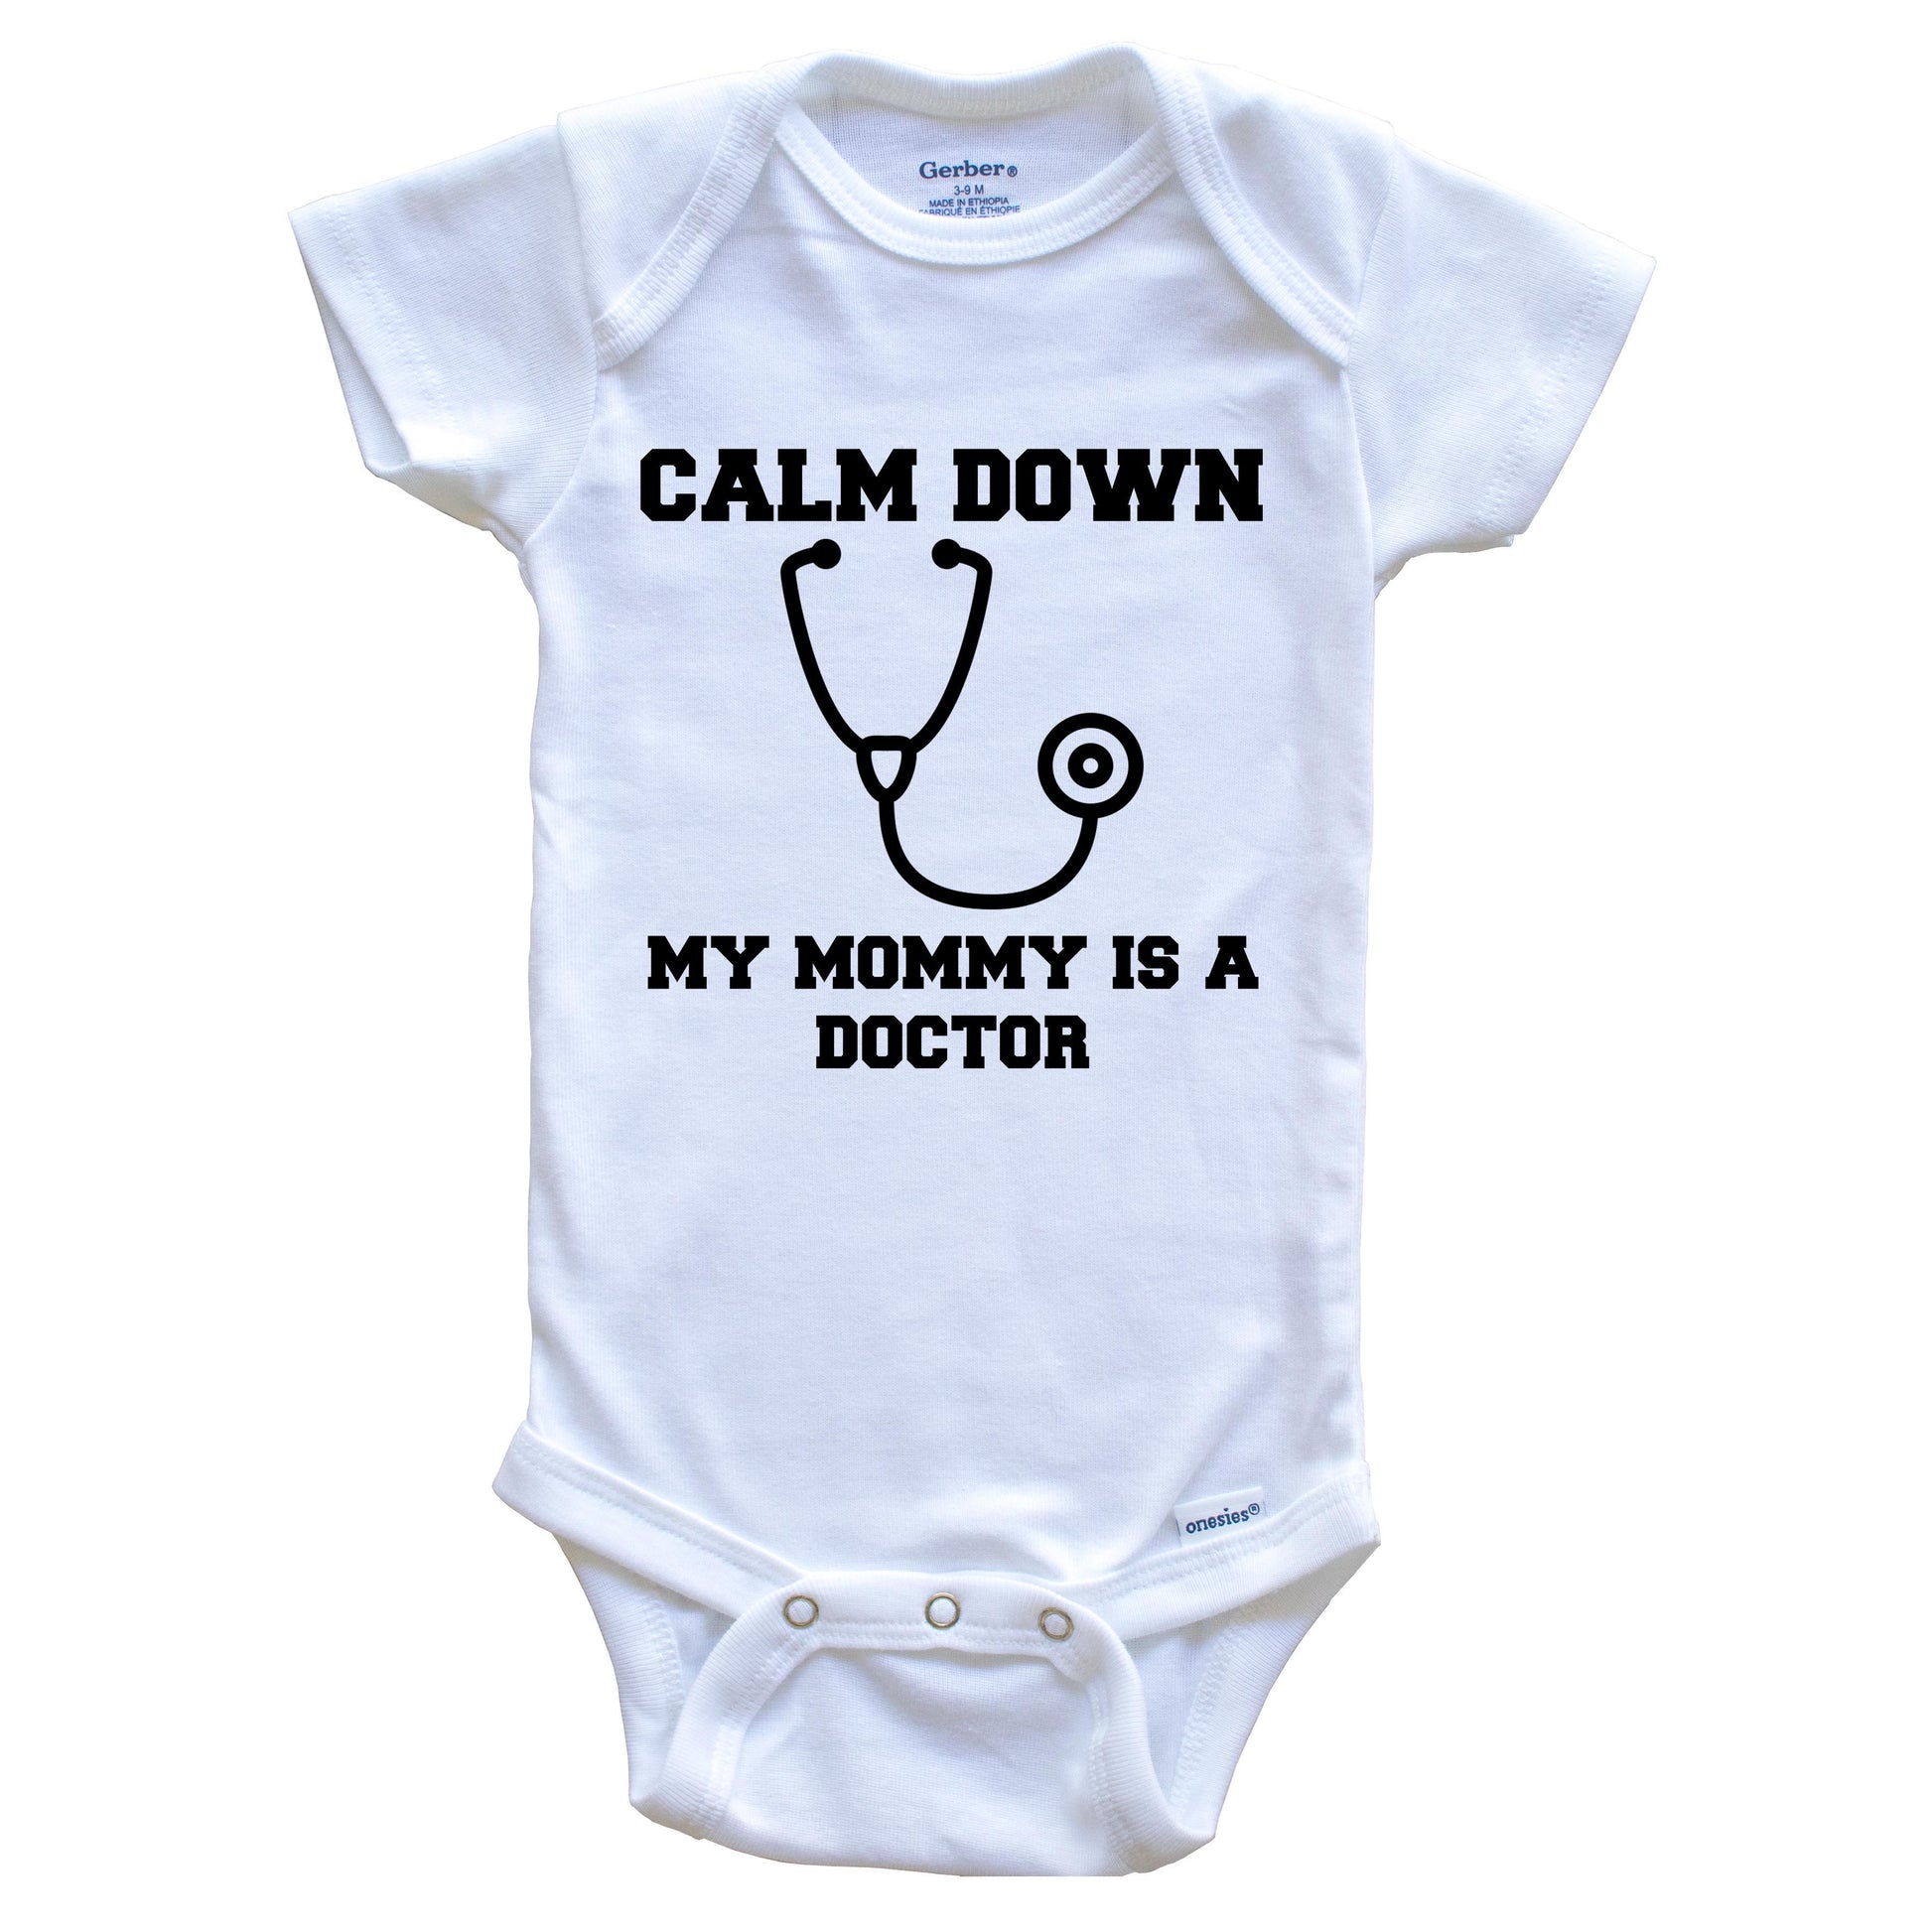 Calm Down My Mommy Is A Doctor Funny Baby Onesie - One Piece Baby Bodysuit